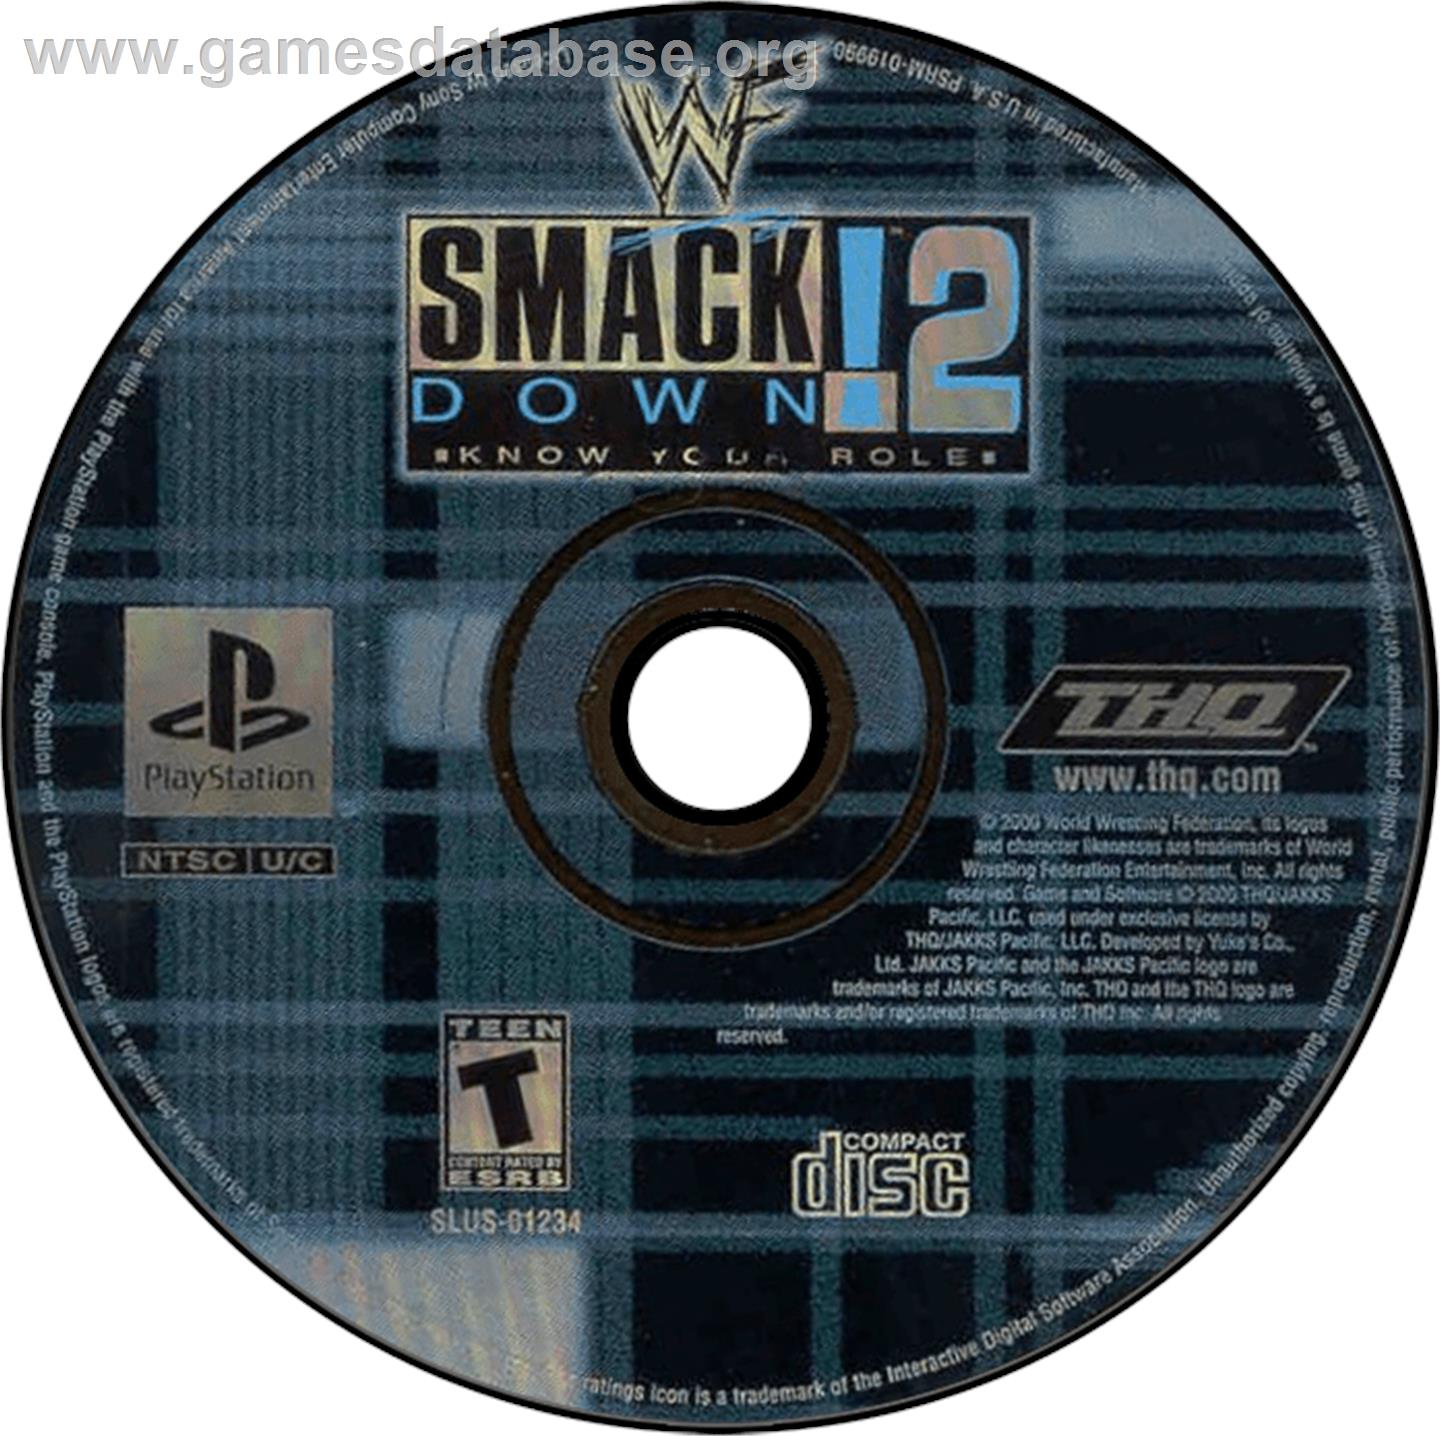 WWF Smackdown! 2: Know Your Role - Sony Playstation - Artwork - Disc